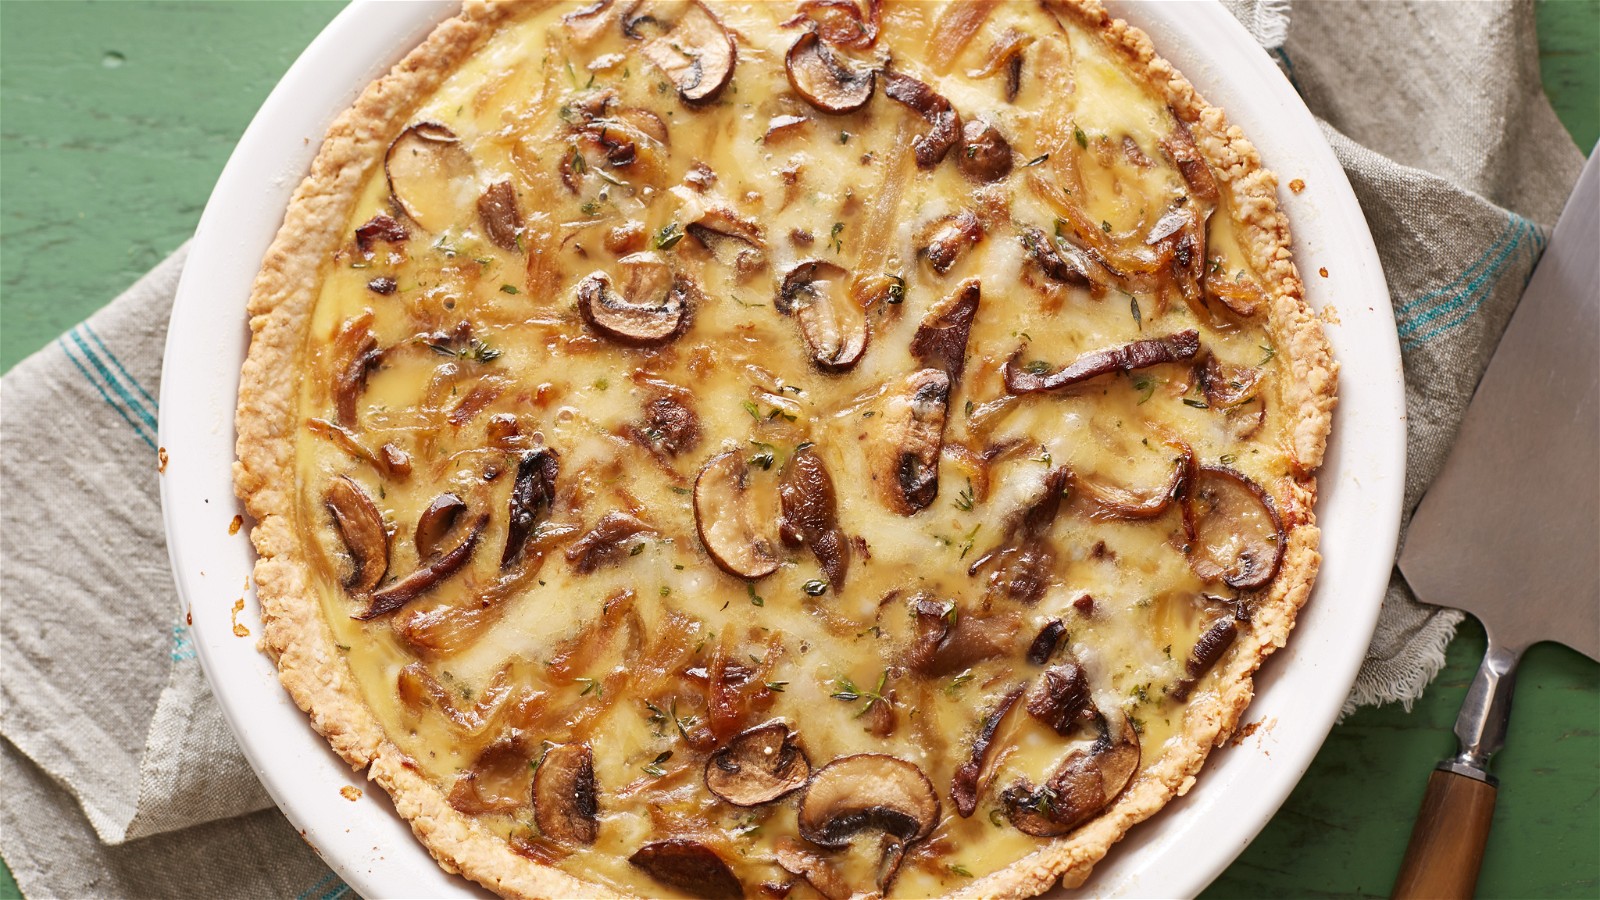 Image of Mushroom Tart with Caramelized Onions and Gruyère Cheese